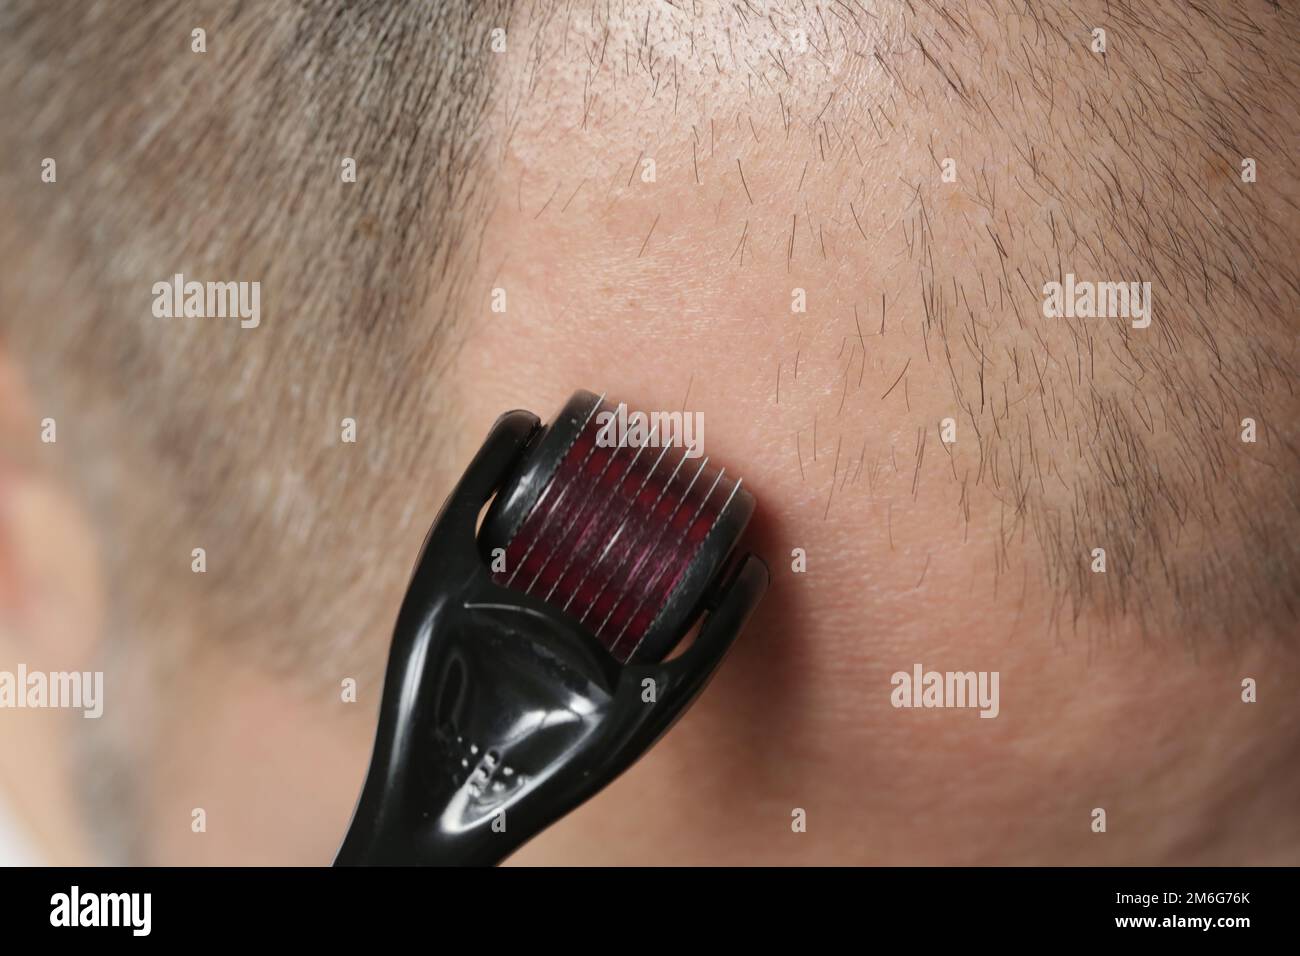 Men using microneedle derma roller on head for stimulating new hair growth. Simple and cheap treatment for alopecia. Stock Photo